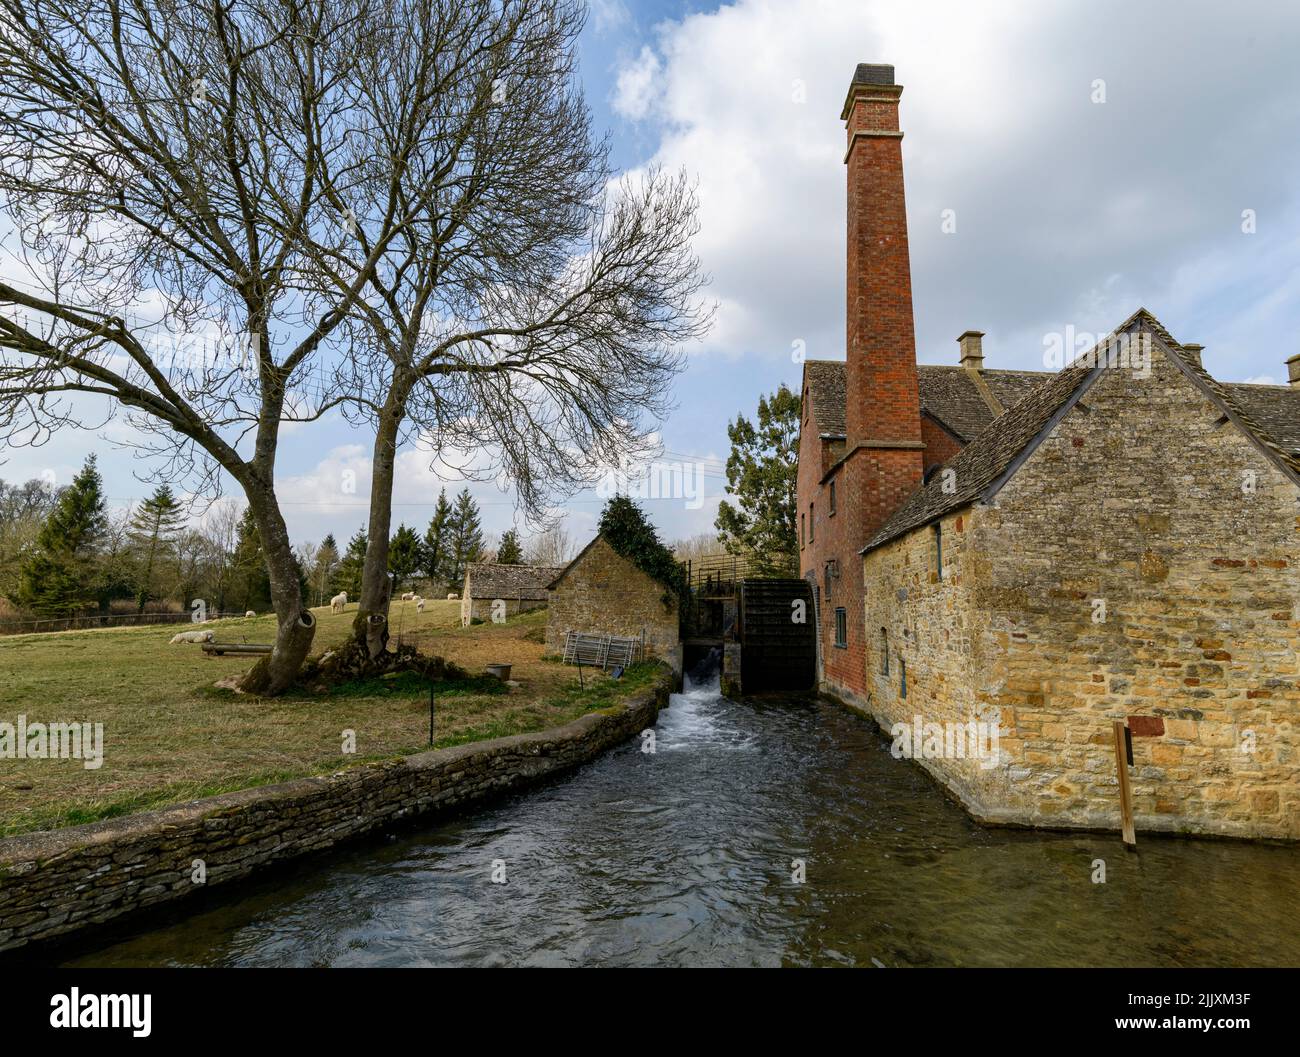 Die OLS-Mühle am River Eye in Lower Slaughter, Cotswold, Gloucestershire, England. Stockfoto